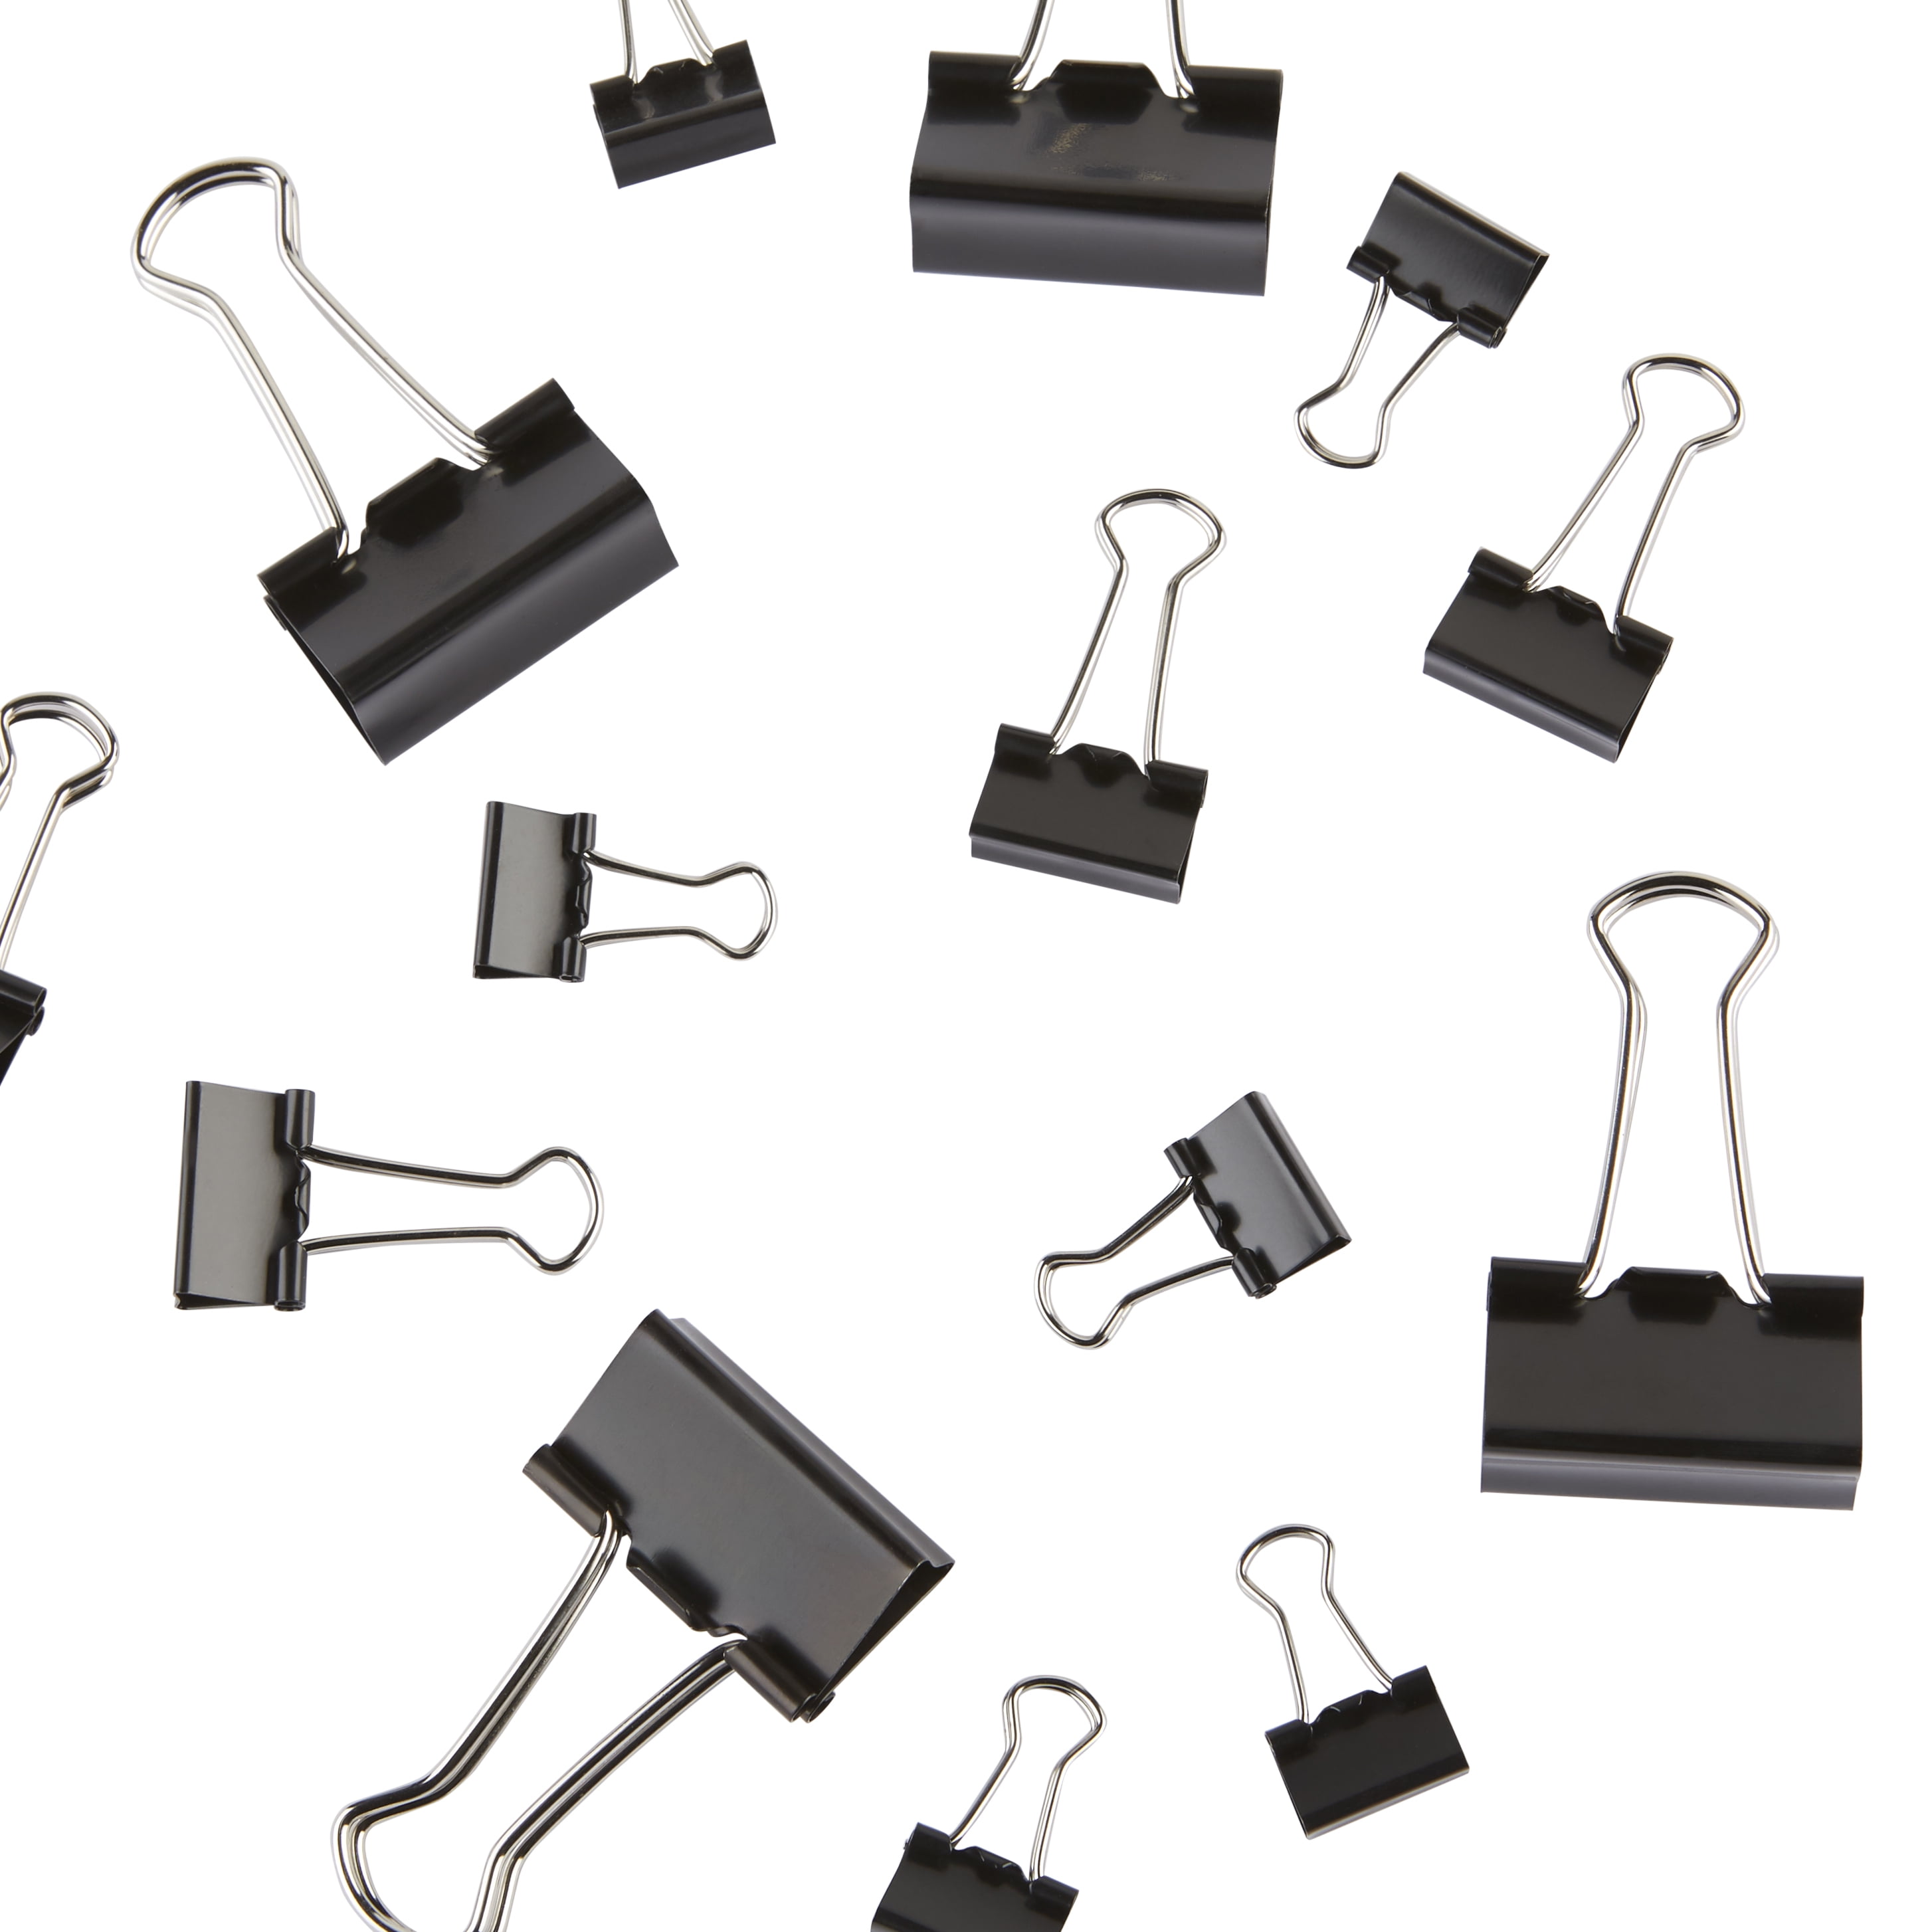 Officemate Binder Clips, Assorted Sizes, Black, 200 Count - Walmart.com ...